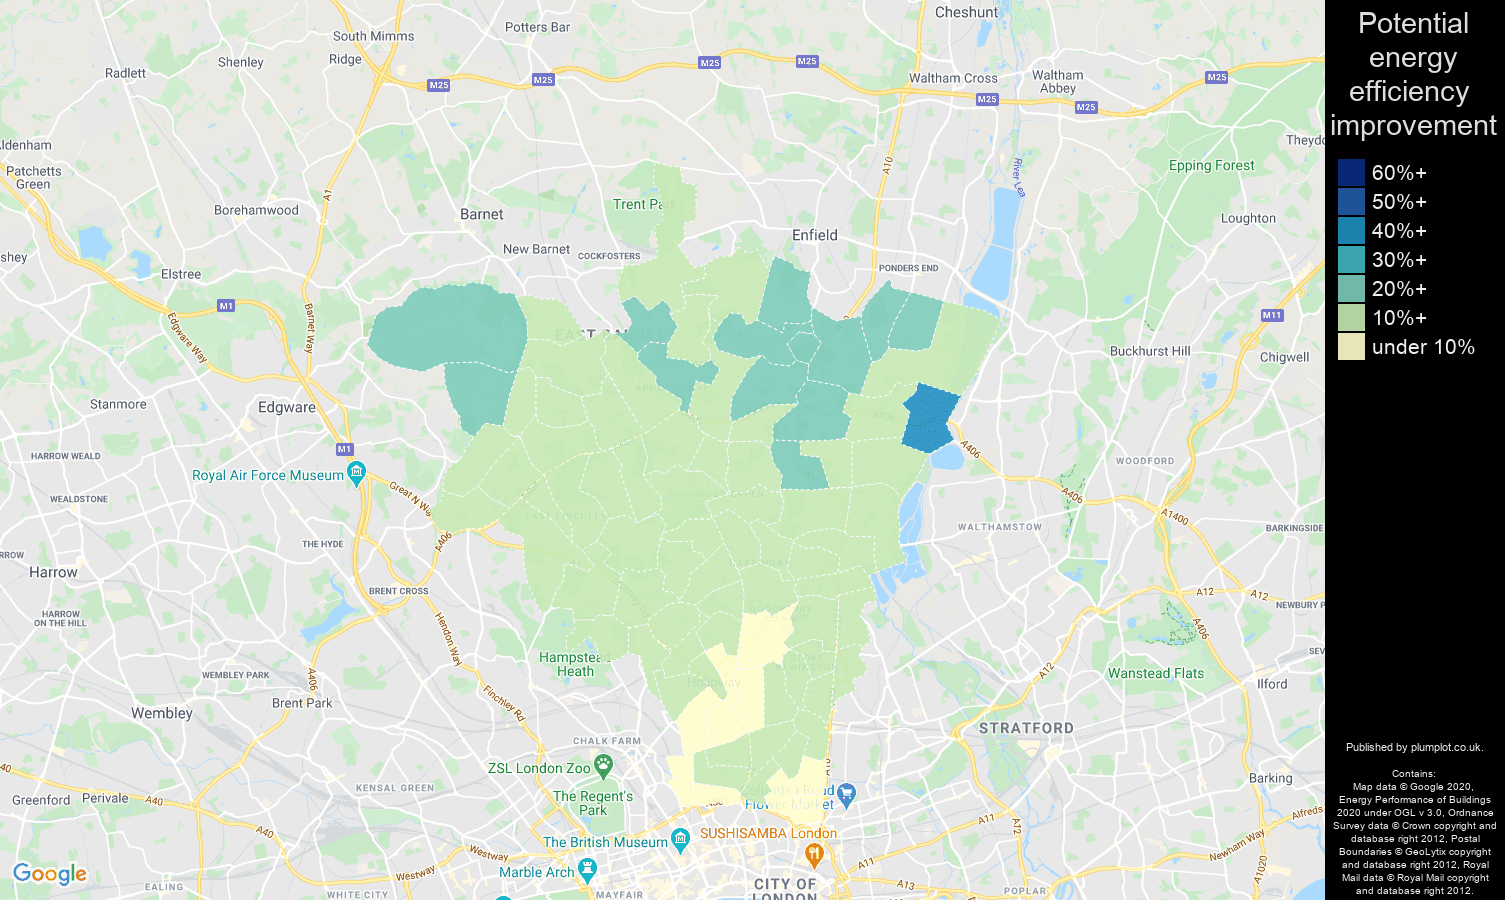 North London map of potential energy efficiency improvement of properties